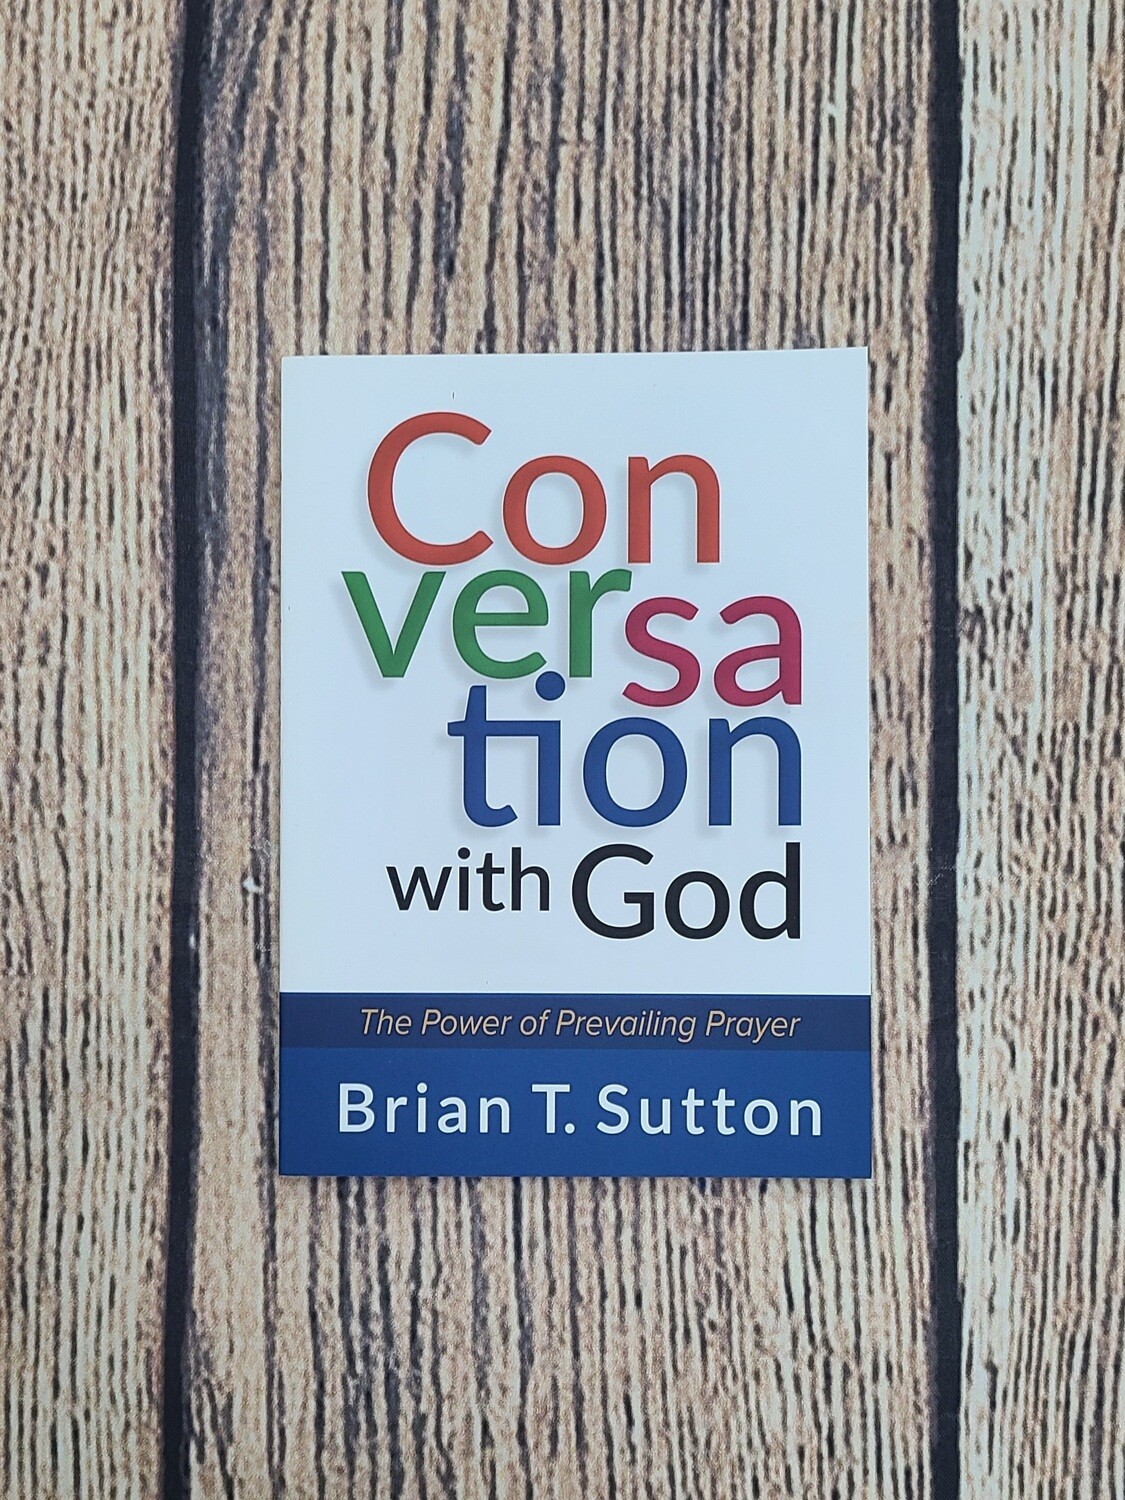 Conversation with God by Brian T. Sutton